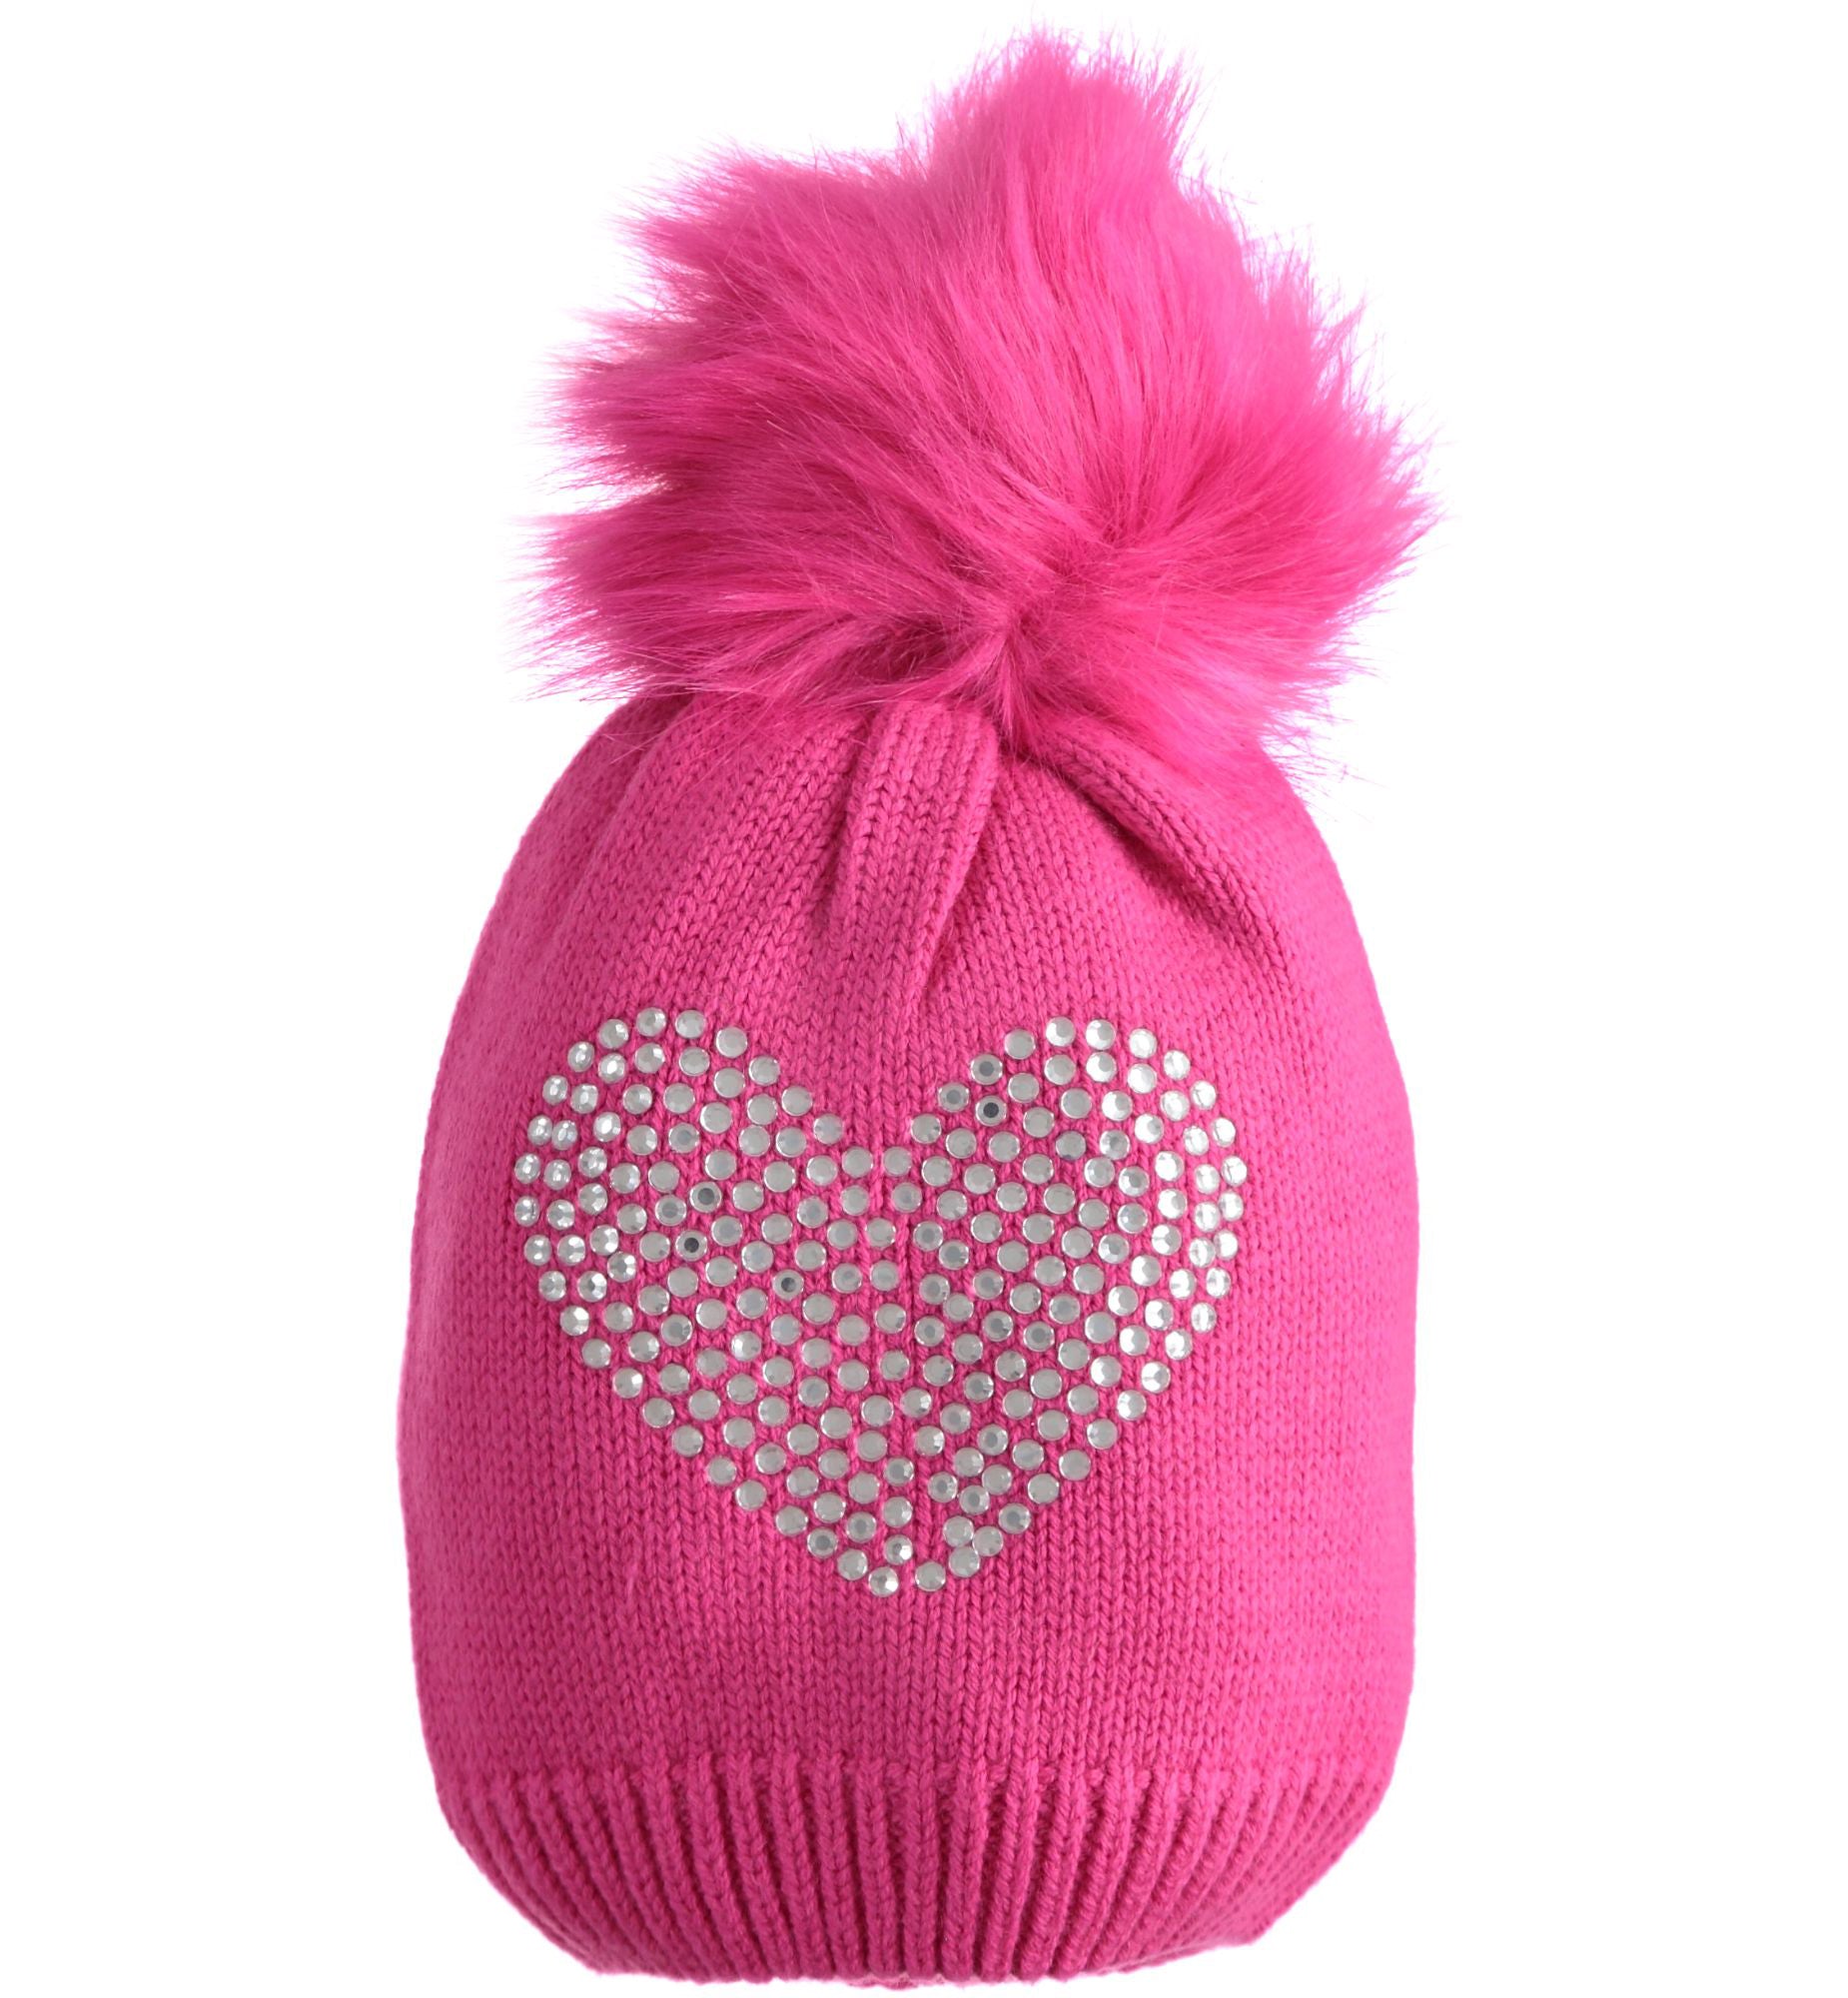 iDO Girls knitted hat with diamonte and faux fur pom pom